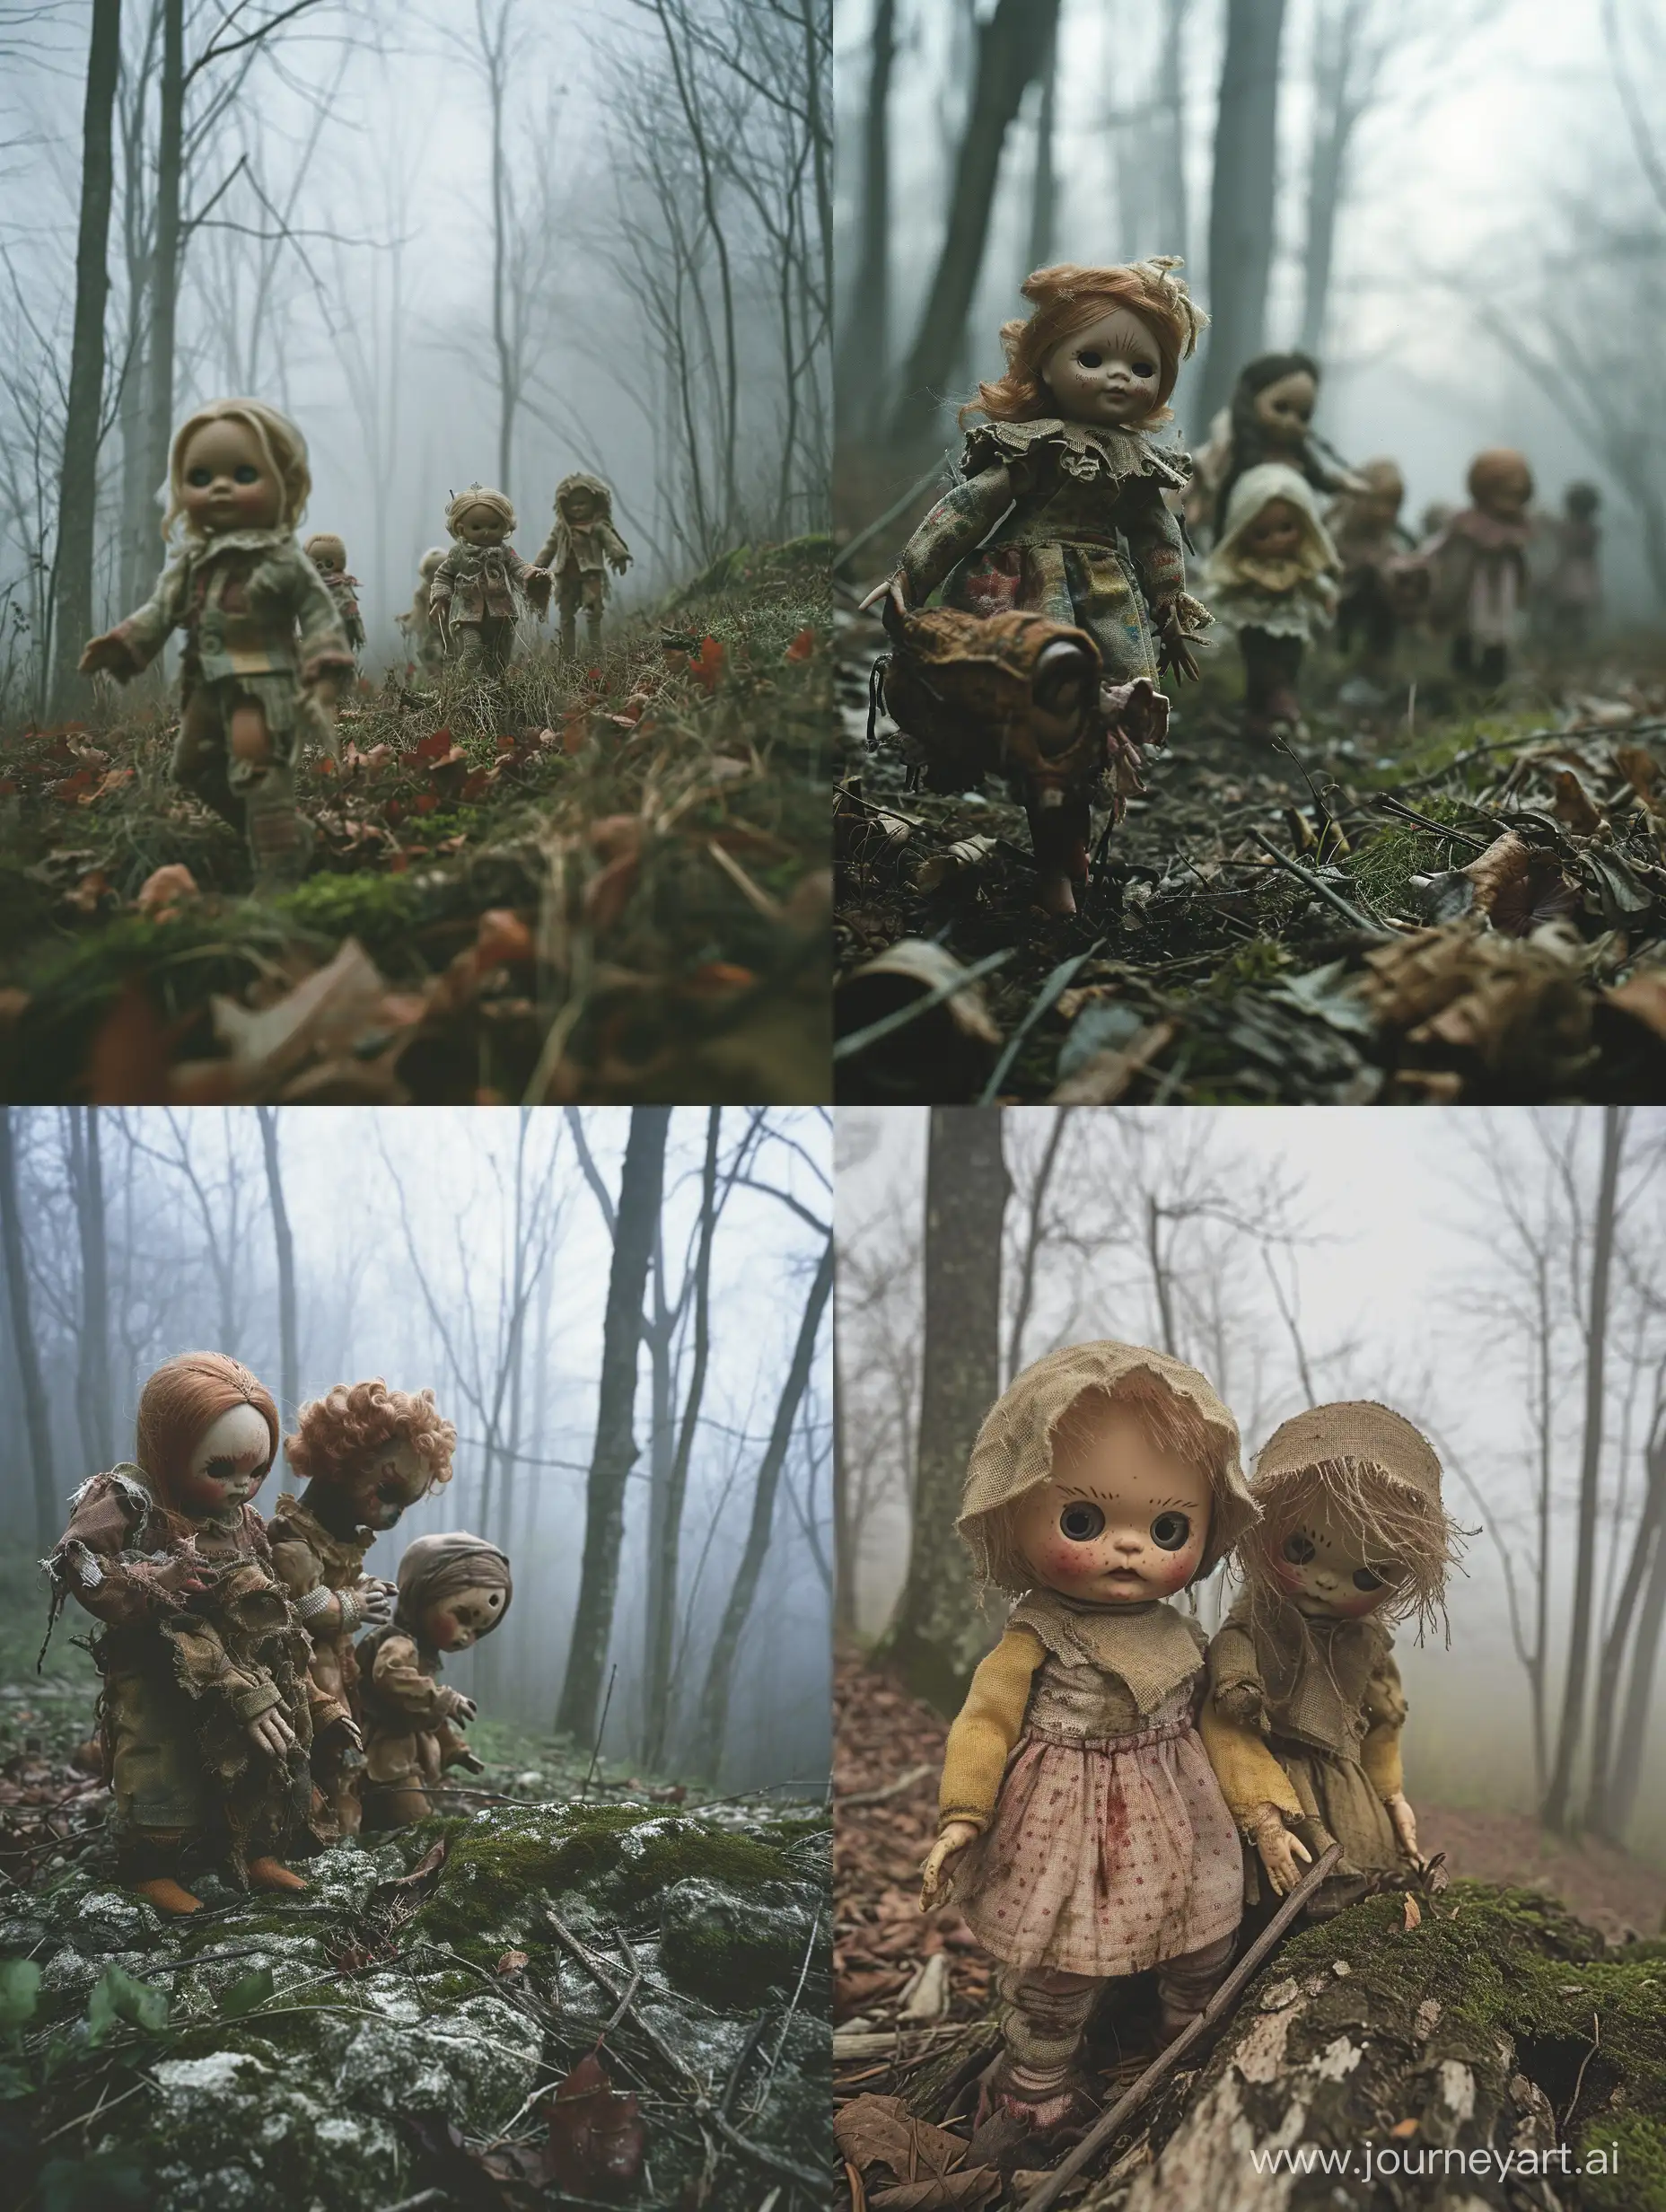 Eerie-Folk-Horror-Scene-with-Realistic-and-Ragged-Dolls-in-Foggy-Woods